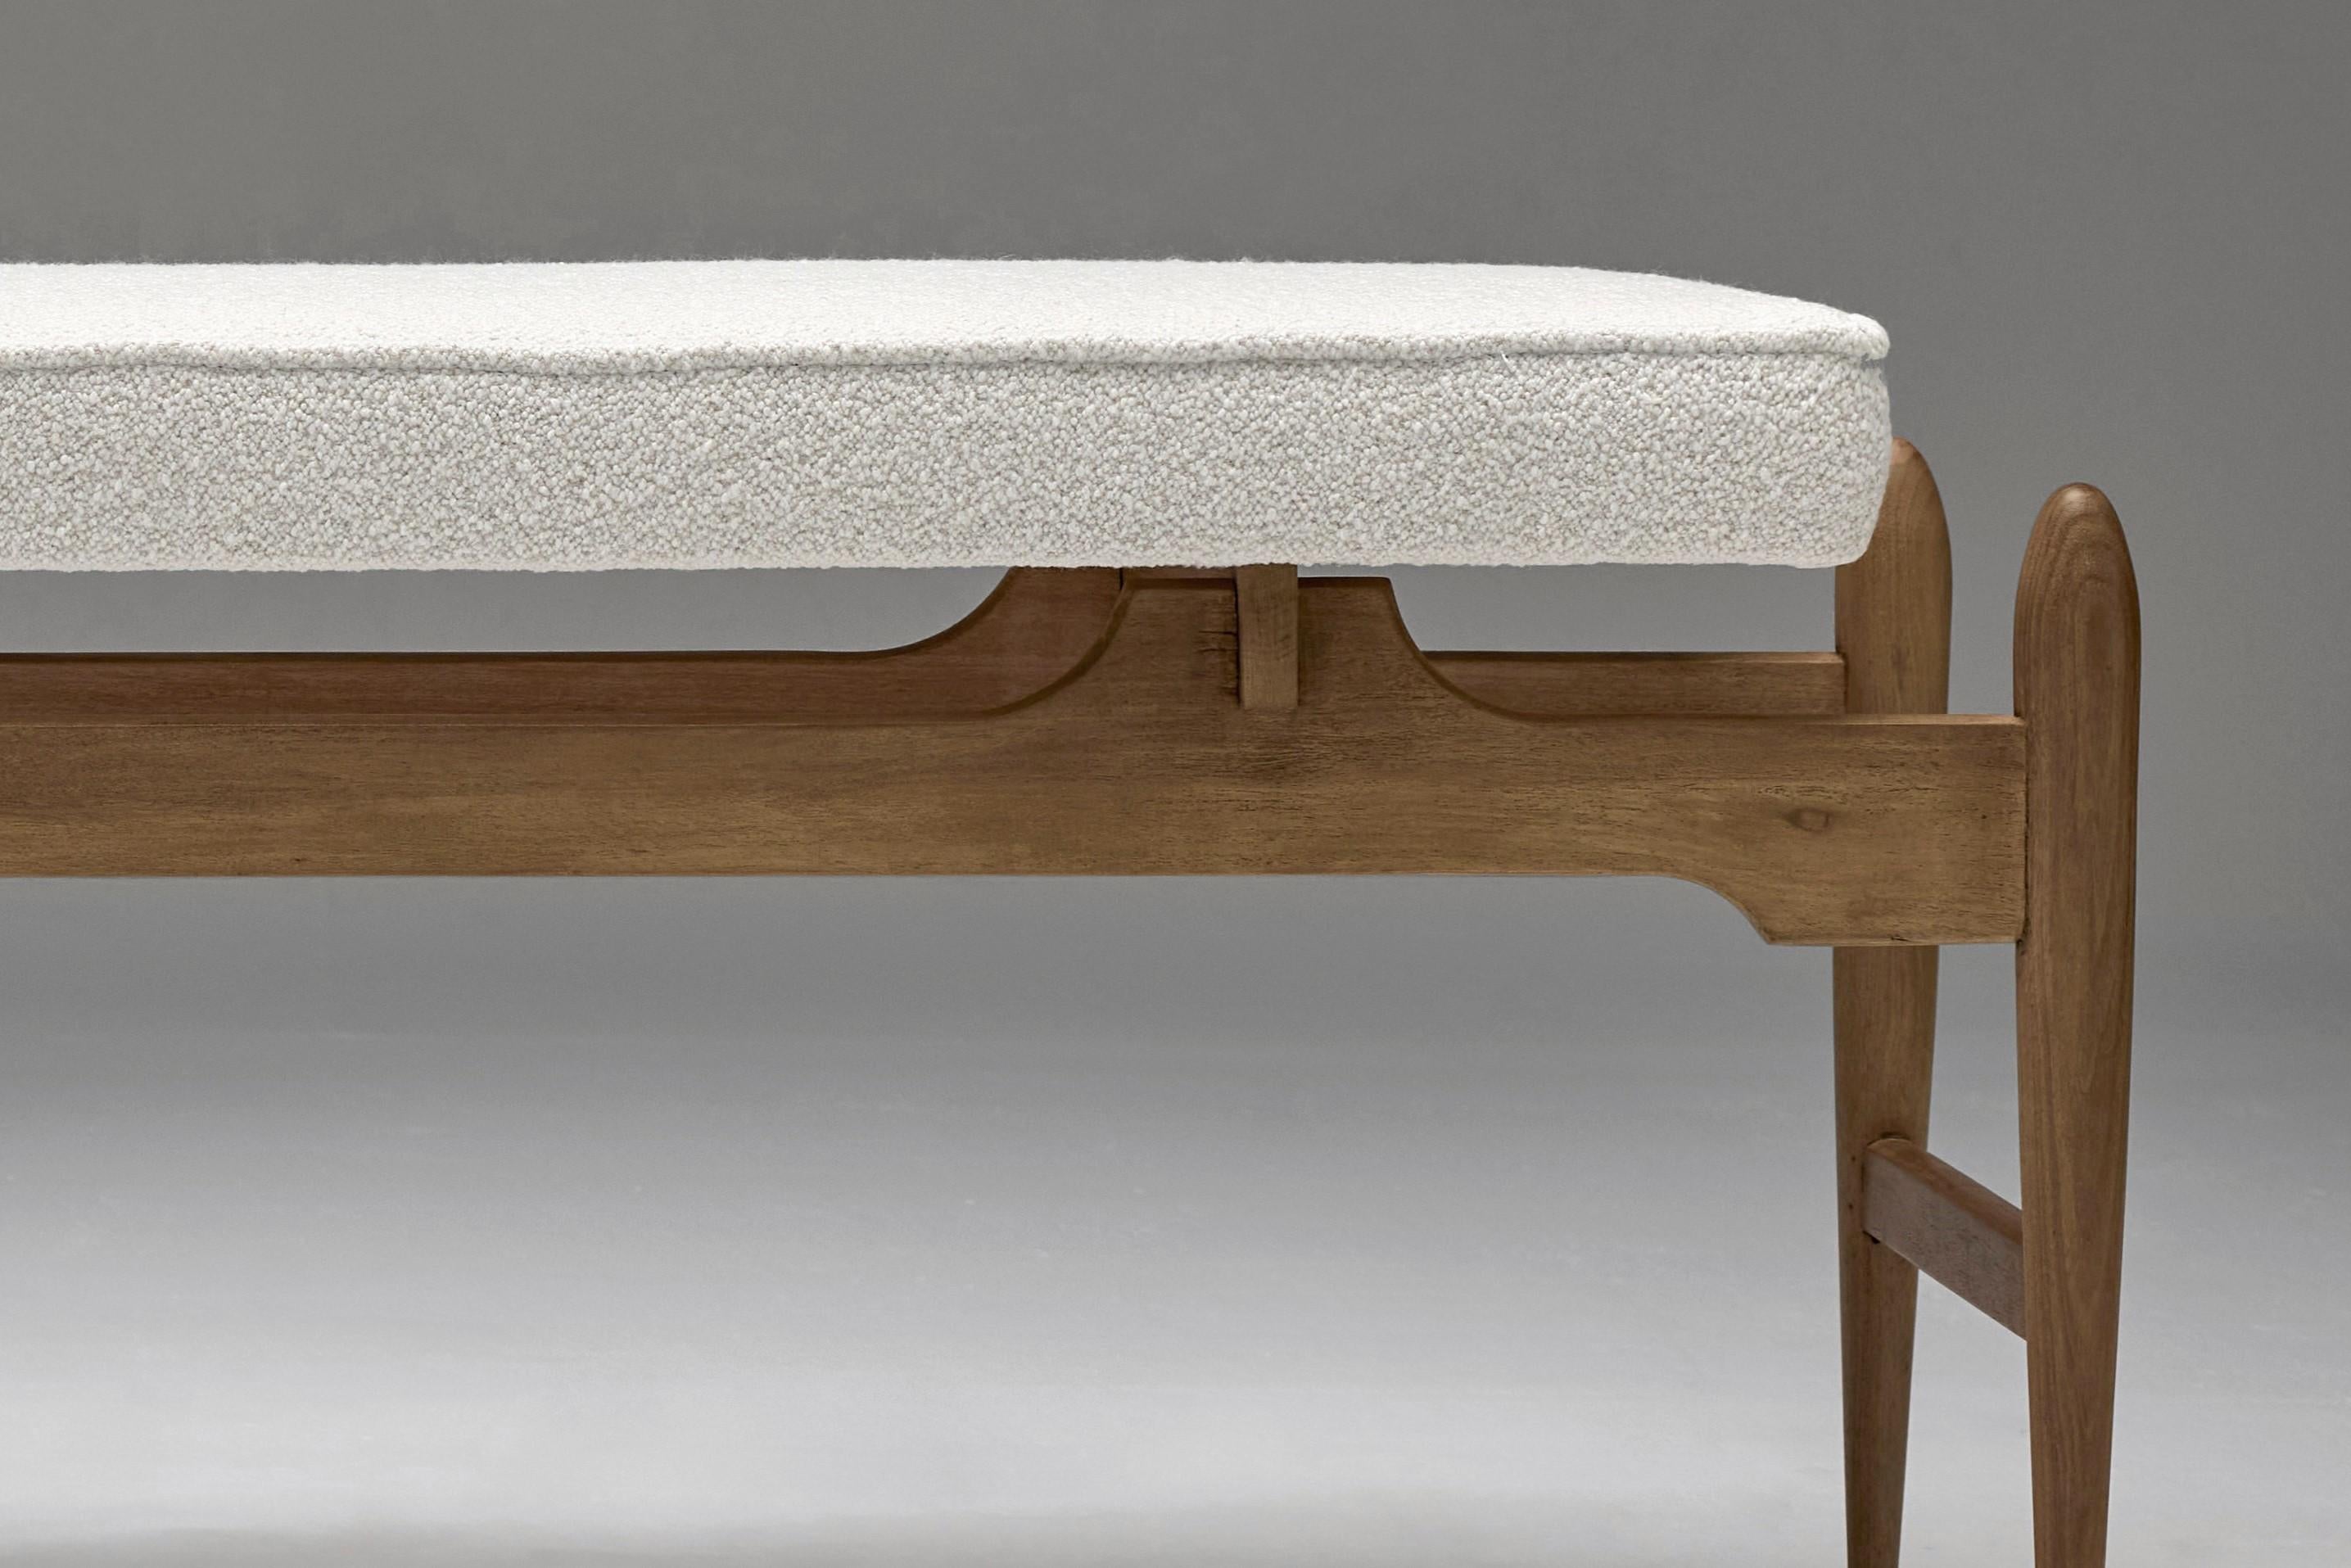 Post-Modern Italian Wooden Bench with Upholstered Seat, 1970s For Sale